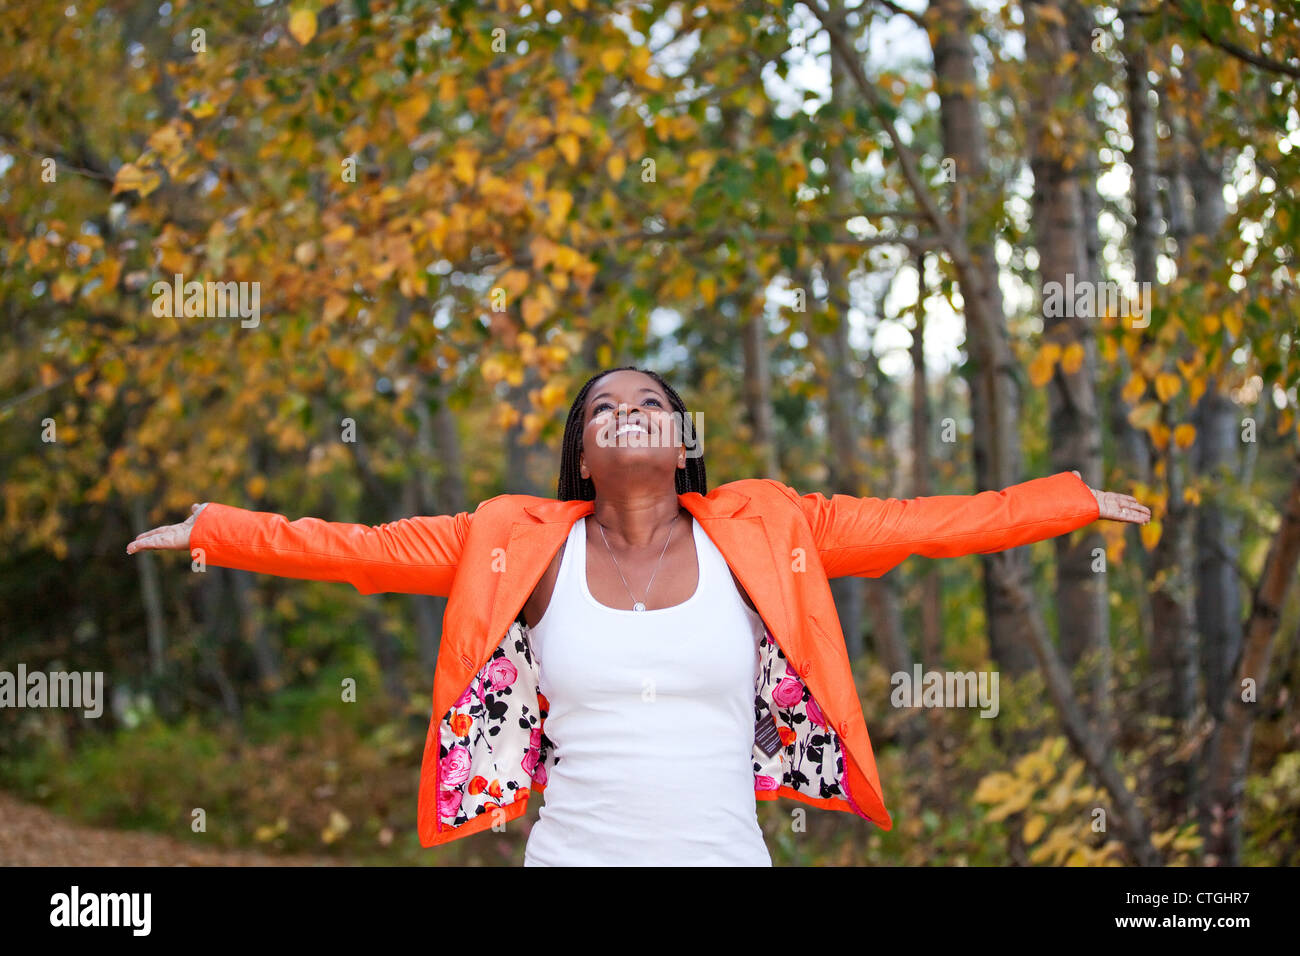 Woman Spreading Arms And Looking Upwards In A Park In Autumn; Edmonton, Alberta, Canada Stock Photo